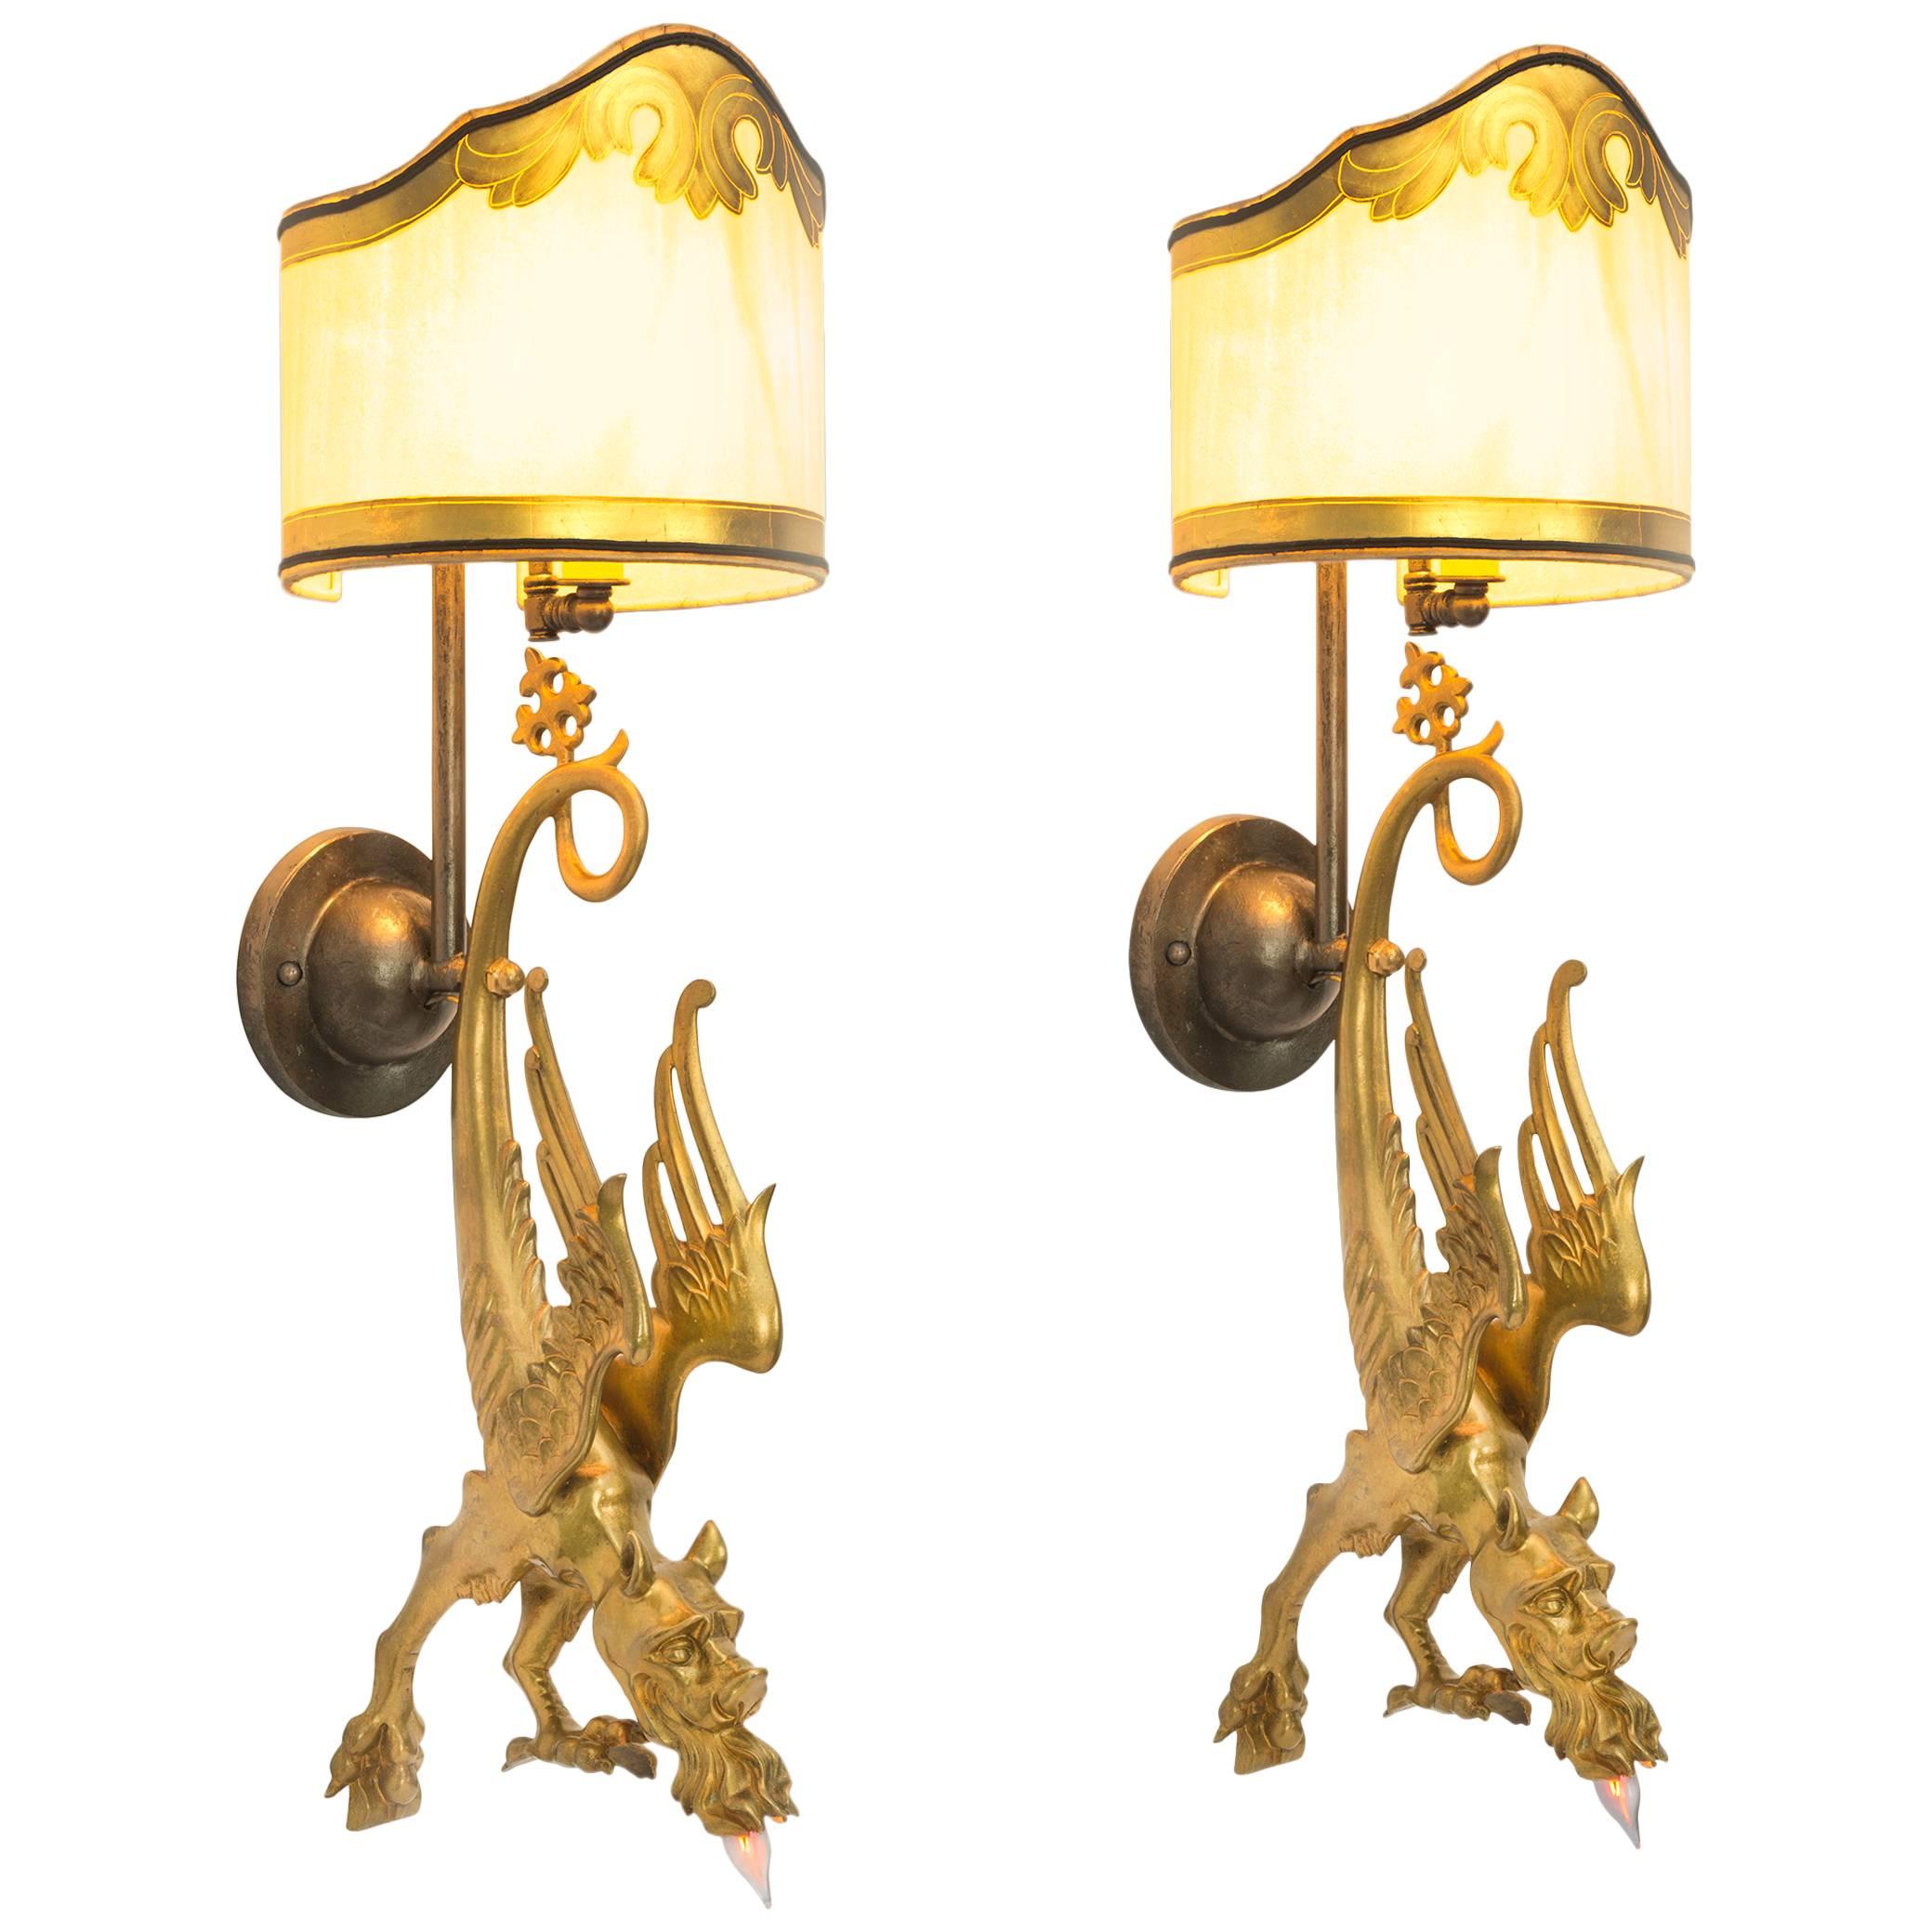 Pair of Gilt Bronze Griffin Dragon Wall Sconces